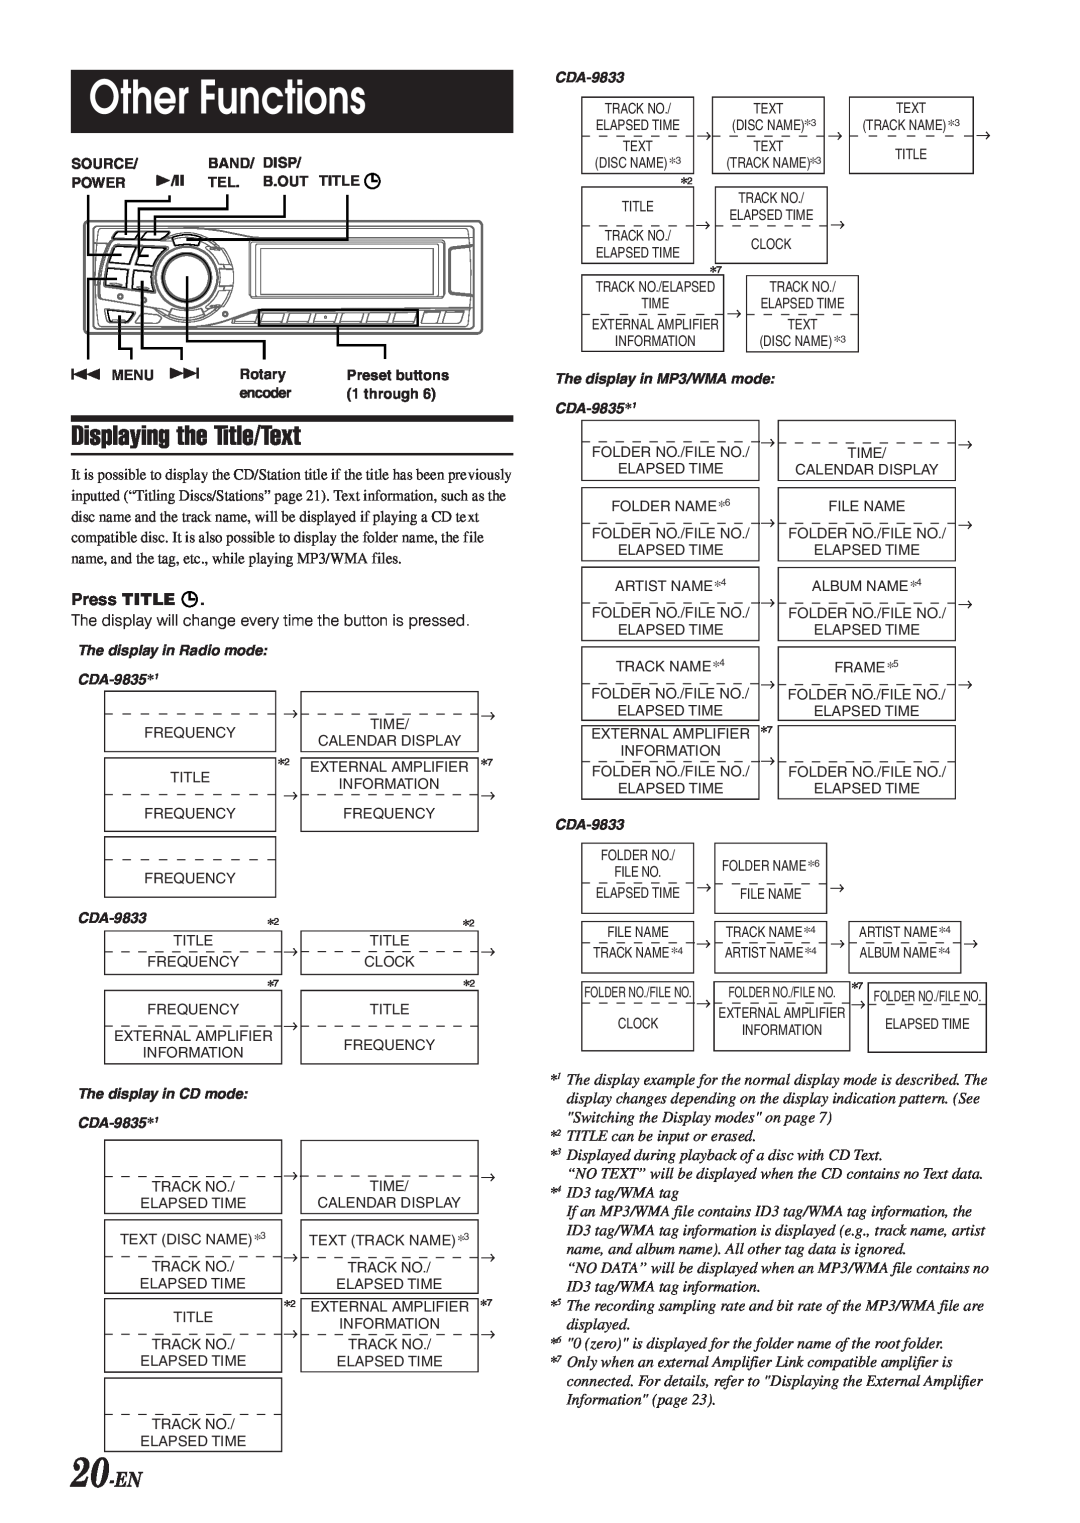 Alpine CDA-9833 owner manual Other Functions, Displaying the Title/Text, 20-EN 